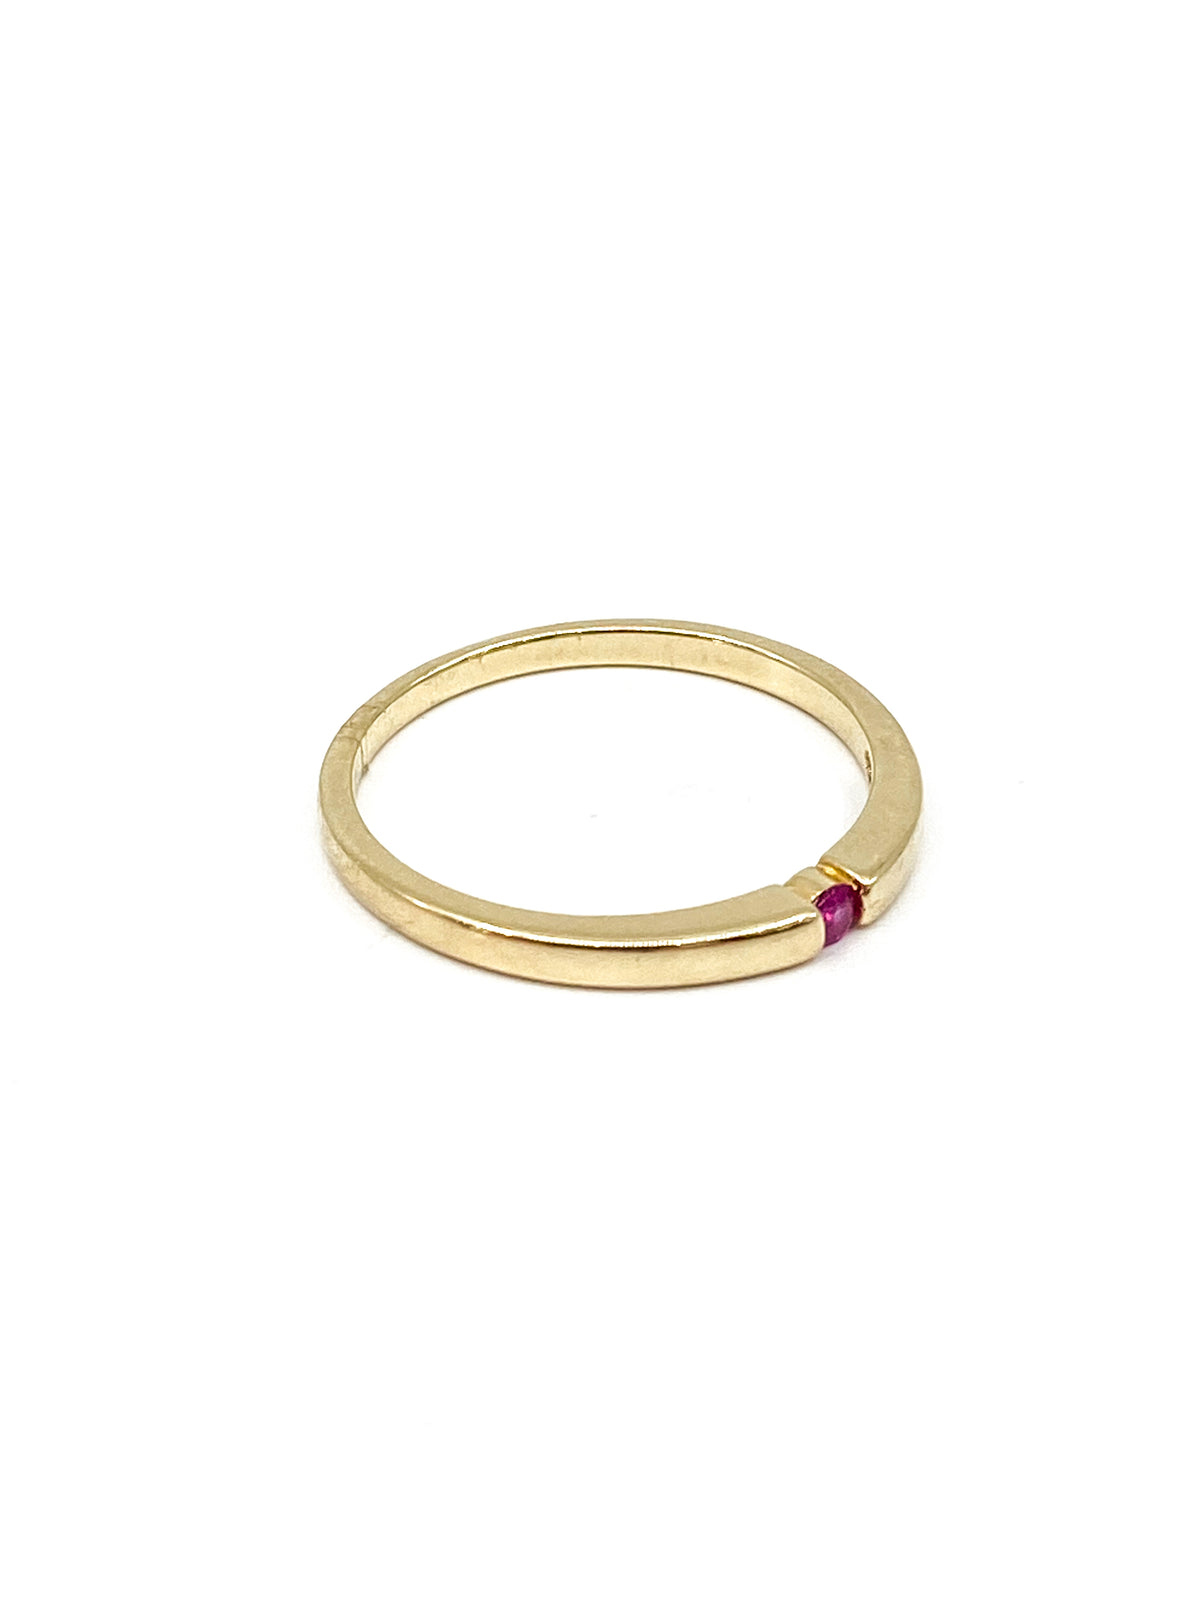 10K Yellow Gold 0.07cttw Genuine Ruby Ring, size 6